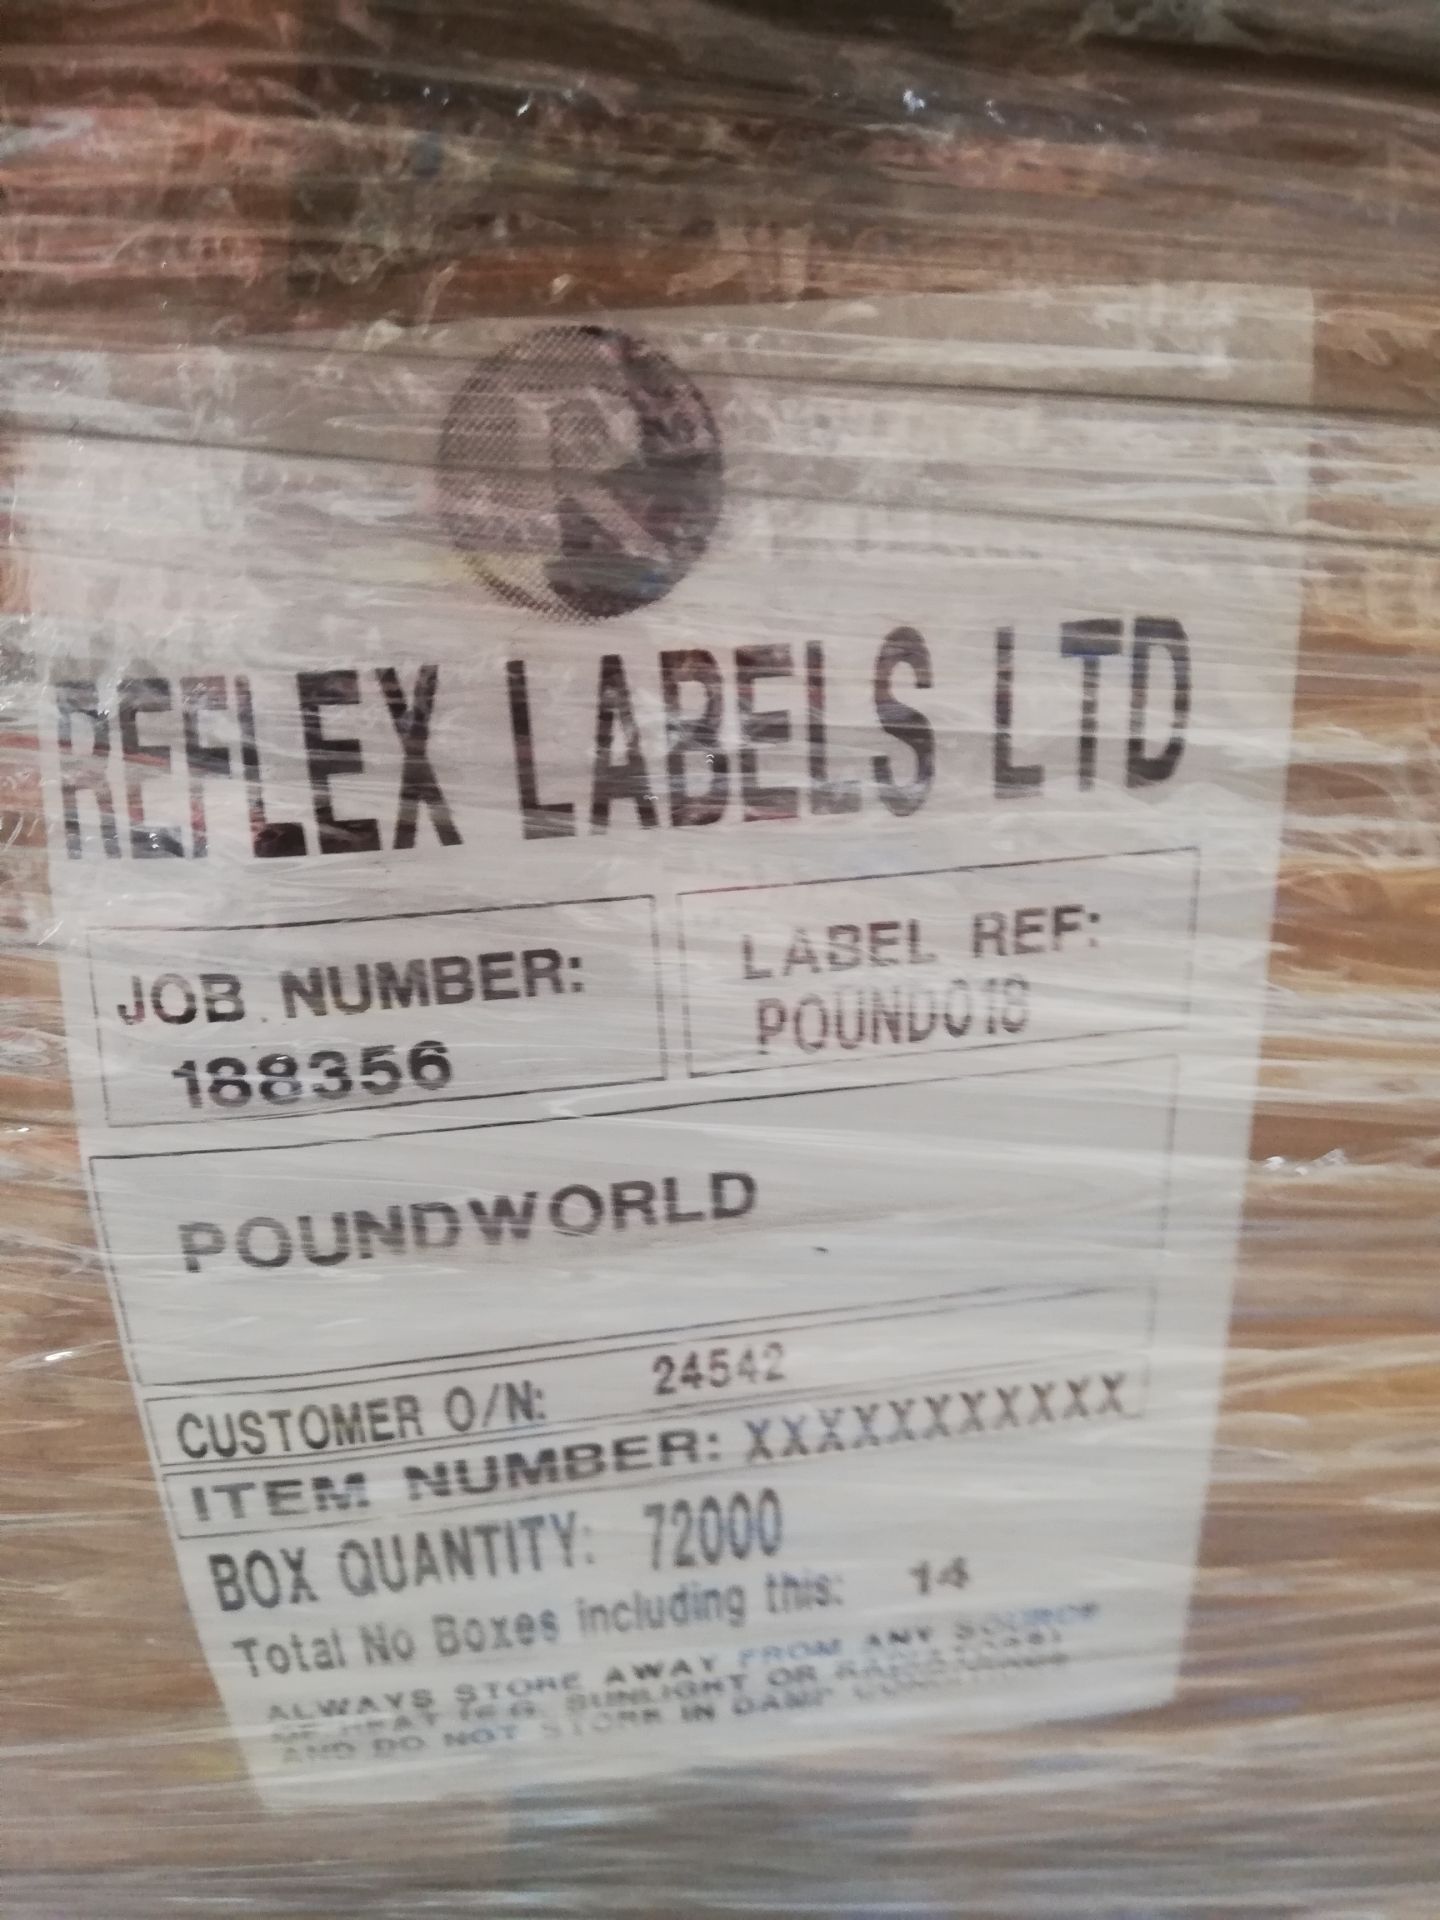 57,600 x Reflex Labels (Boxed) - Image 2 of 2